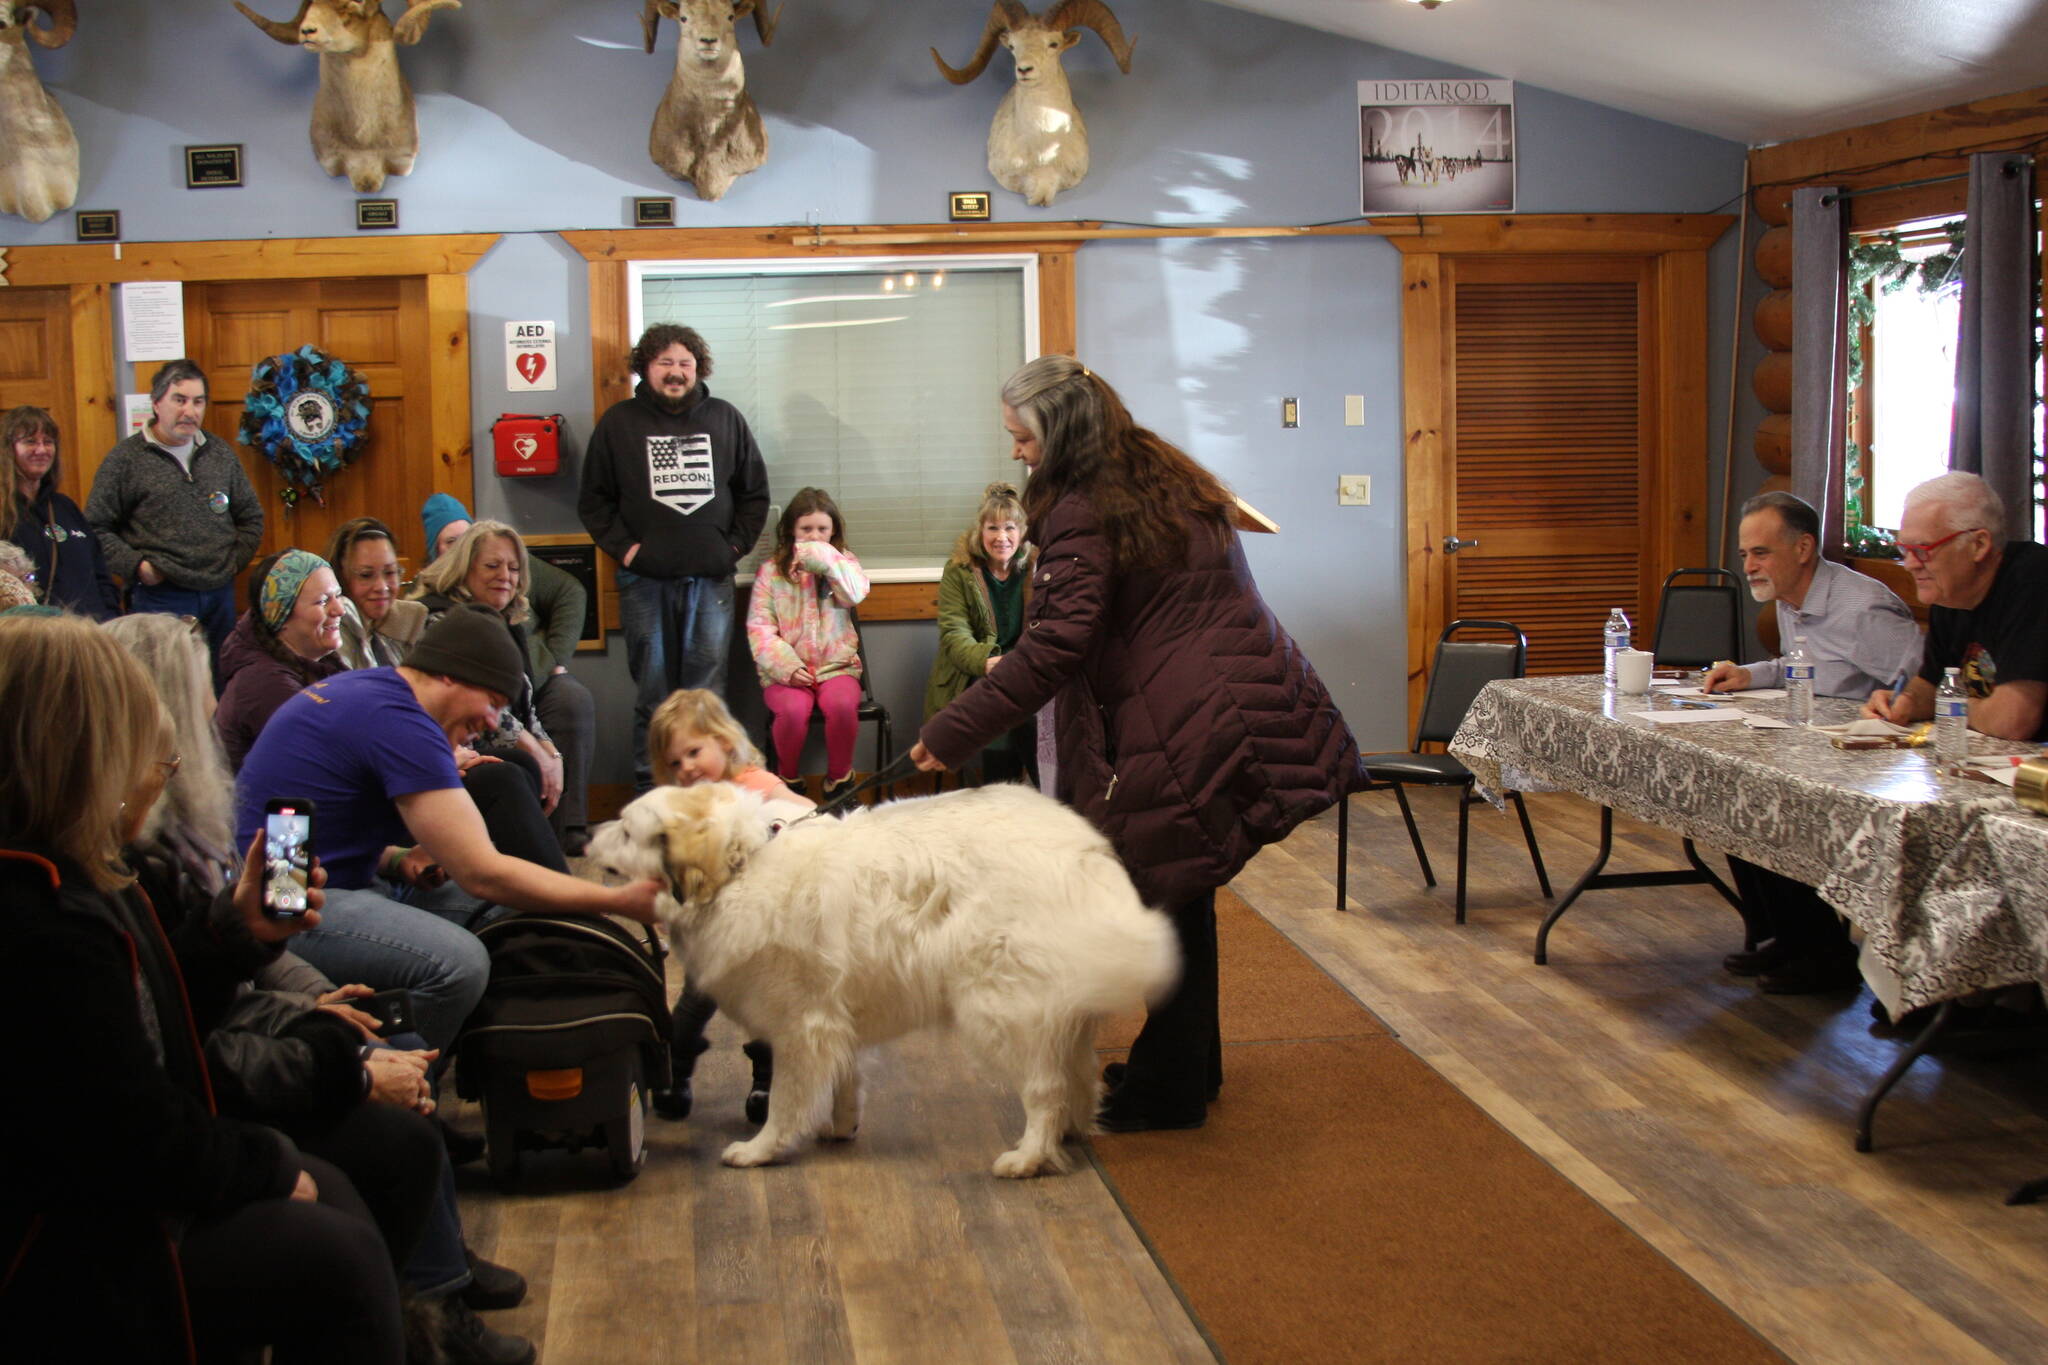 “Best manners” award winner, Great Pyrenees Bronwyn, says hello to members of the audience with her owner, Julienne Ihly during the Snow Rondi dog show on Sunday, March 5 at the Anchor Point Senior Center in Anchor Point, Alaska. Photo by Delcenia Cosman